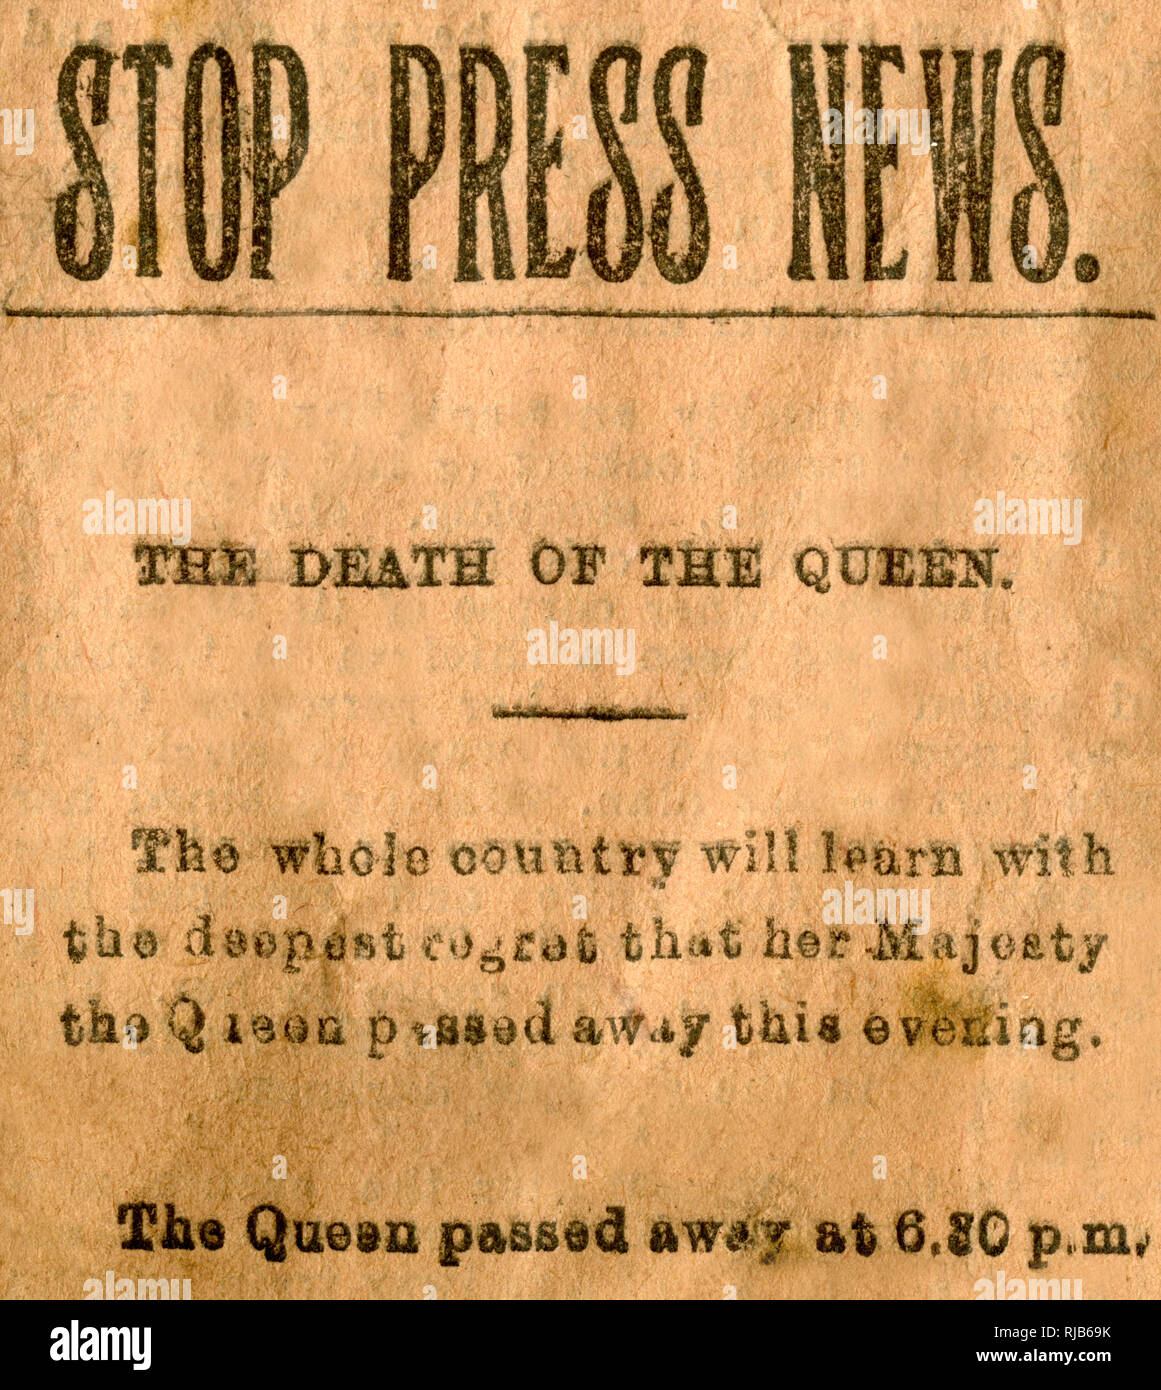 The Star newspaper stop press, death of Queen Victoria, 22 January 1901. Stock Photo